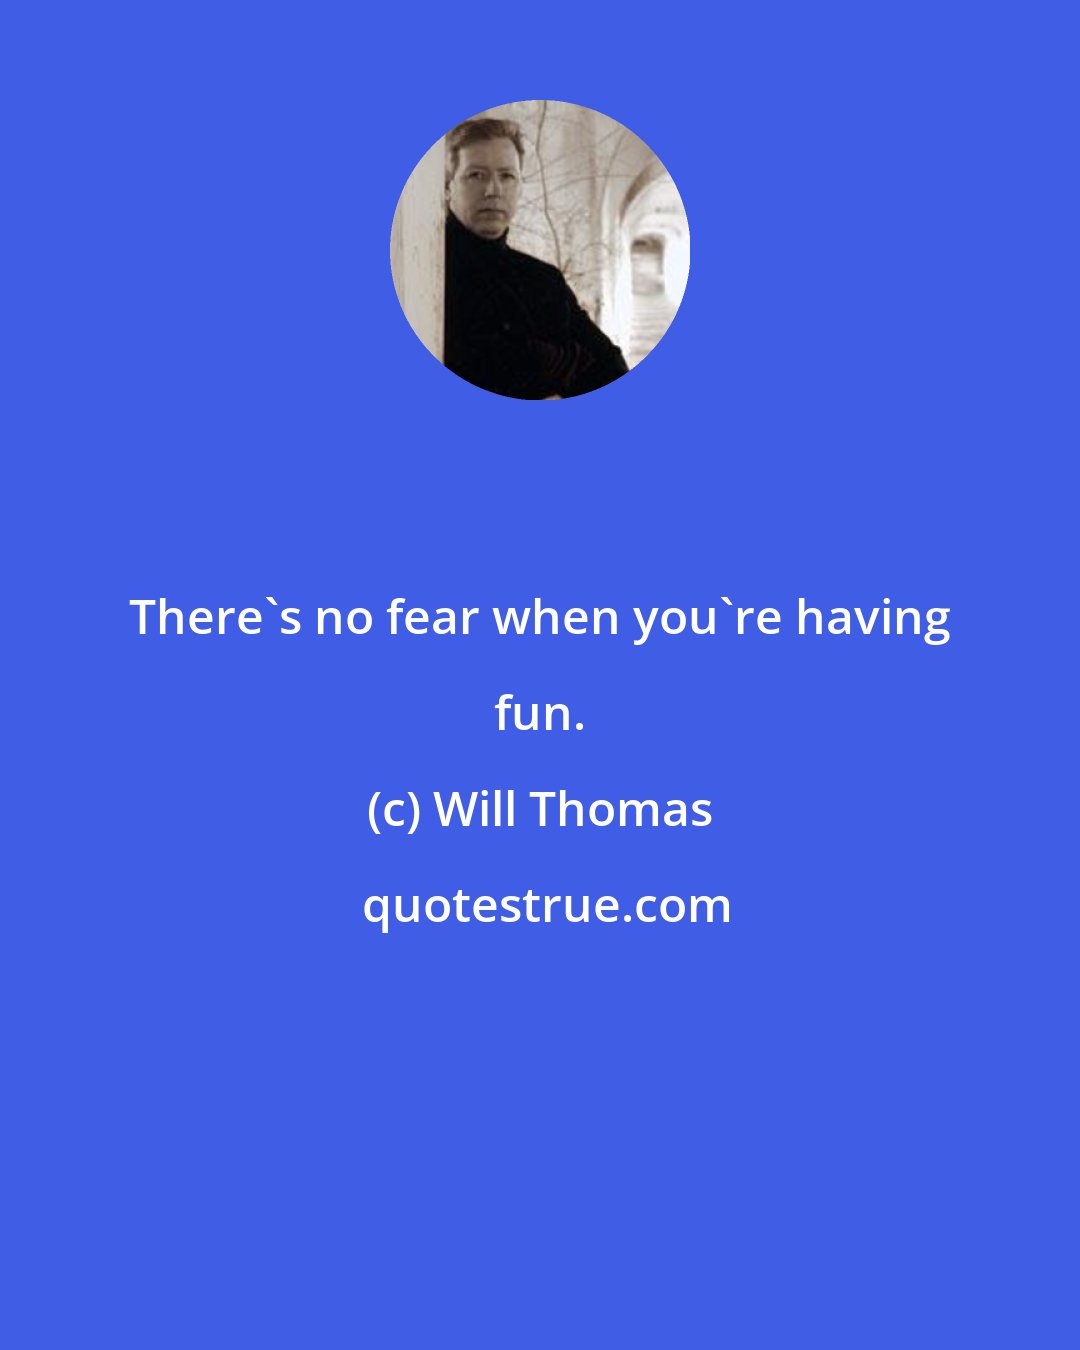 Will Thomas: There's no fear when you're having fun.